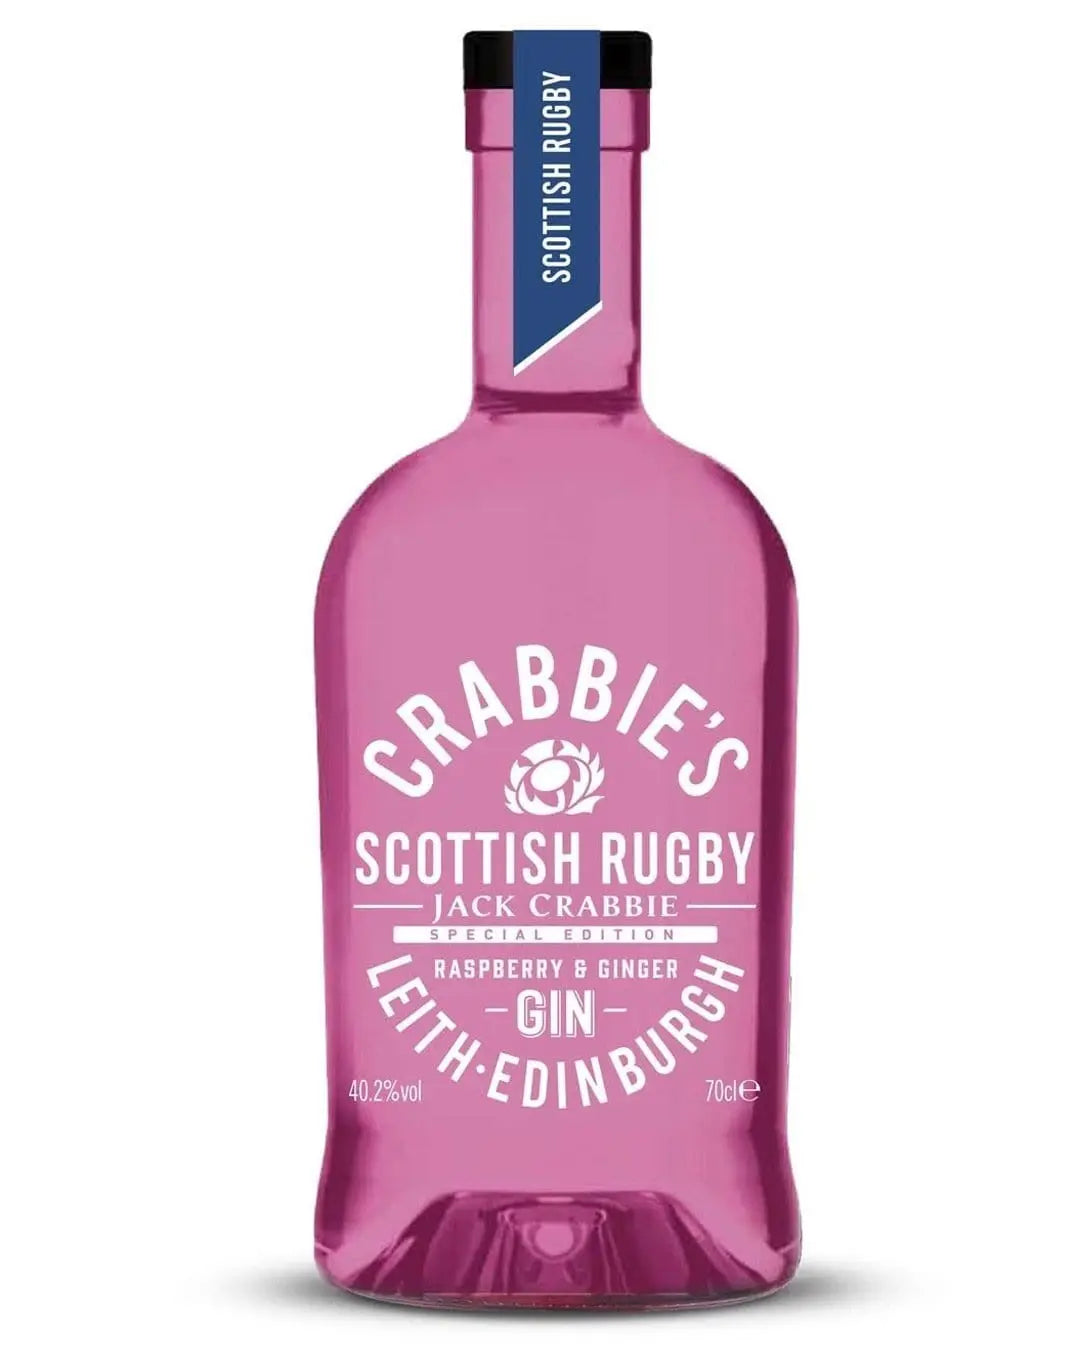 Crabbie's Scottish Rugby Raspberry & Ginger Gin, 70 cl Gin